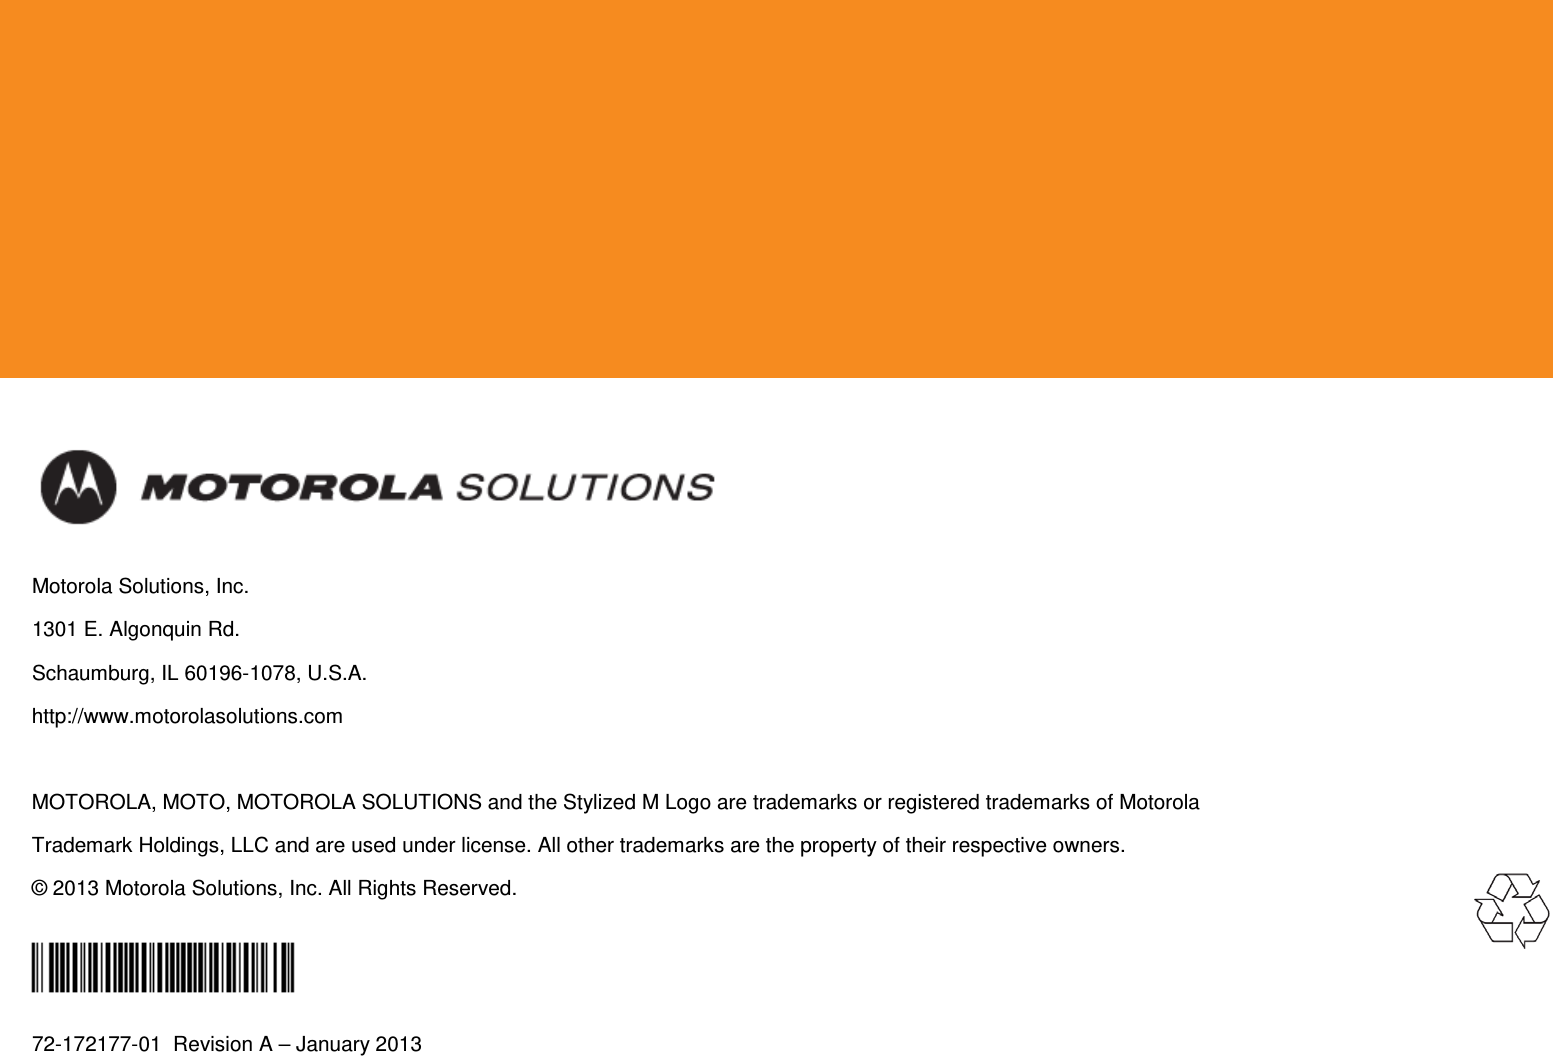            Motorola Solutions, Inc. 1301 E. Algonquin Rd. Schaumburg, IL 60196-1078, U.S.A. http://www.motorolasolutions.com  MOTOROLA, MOTO, MOTOROLA SOLUTIONS and the Stylized M Logo are trademarks or registered trademarks of Motorola Trademark Holdings, LLC and are used under license. All other trademarks are the property of their respective owners. © 2013 Motorola Solutions, Inc. All Rights Reserved.  72-172177-01  Revision A – January 2013  